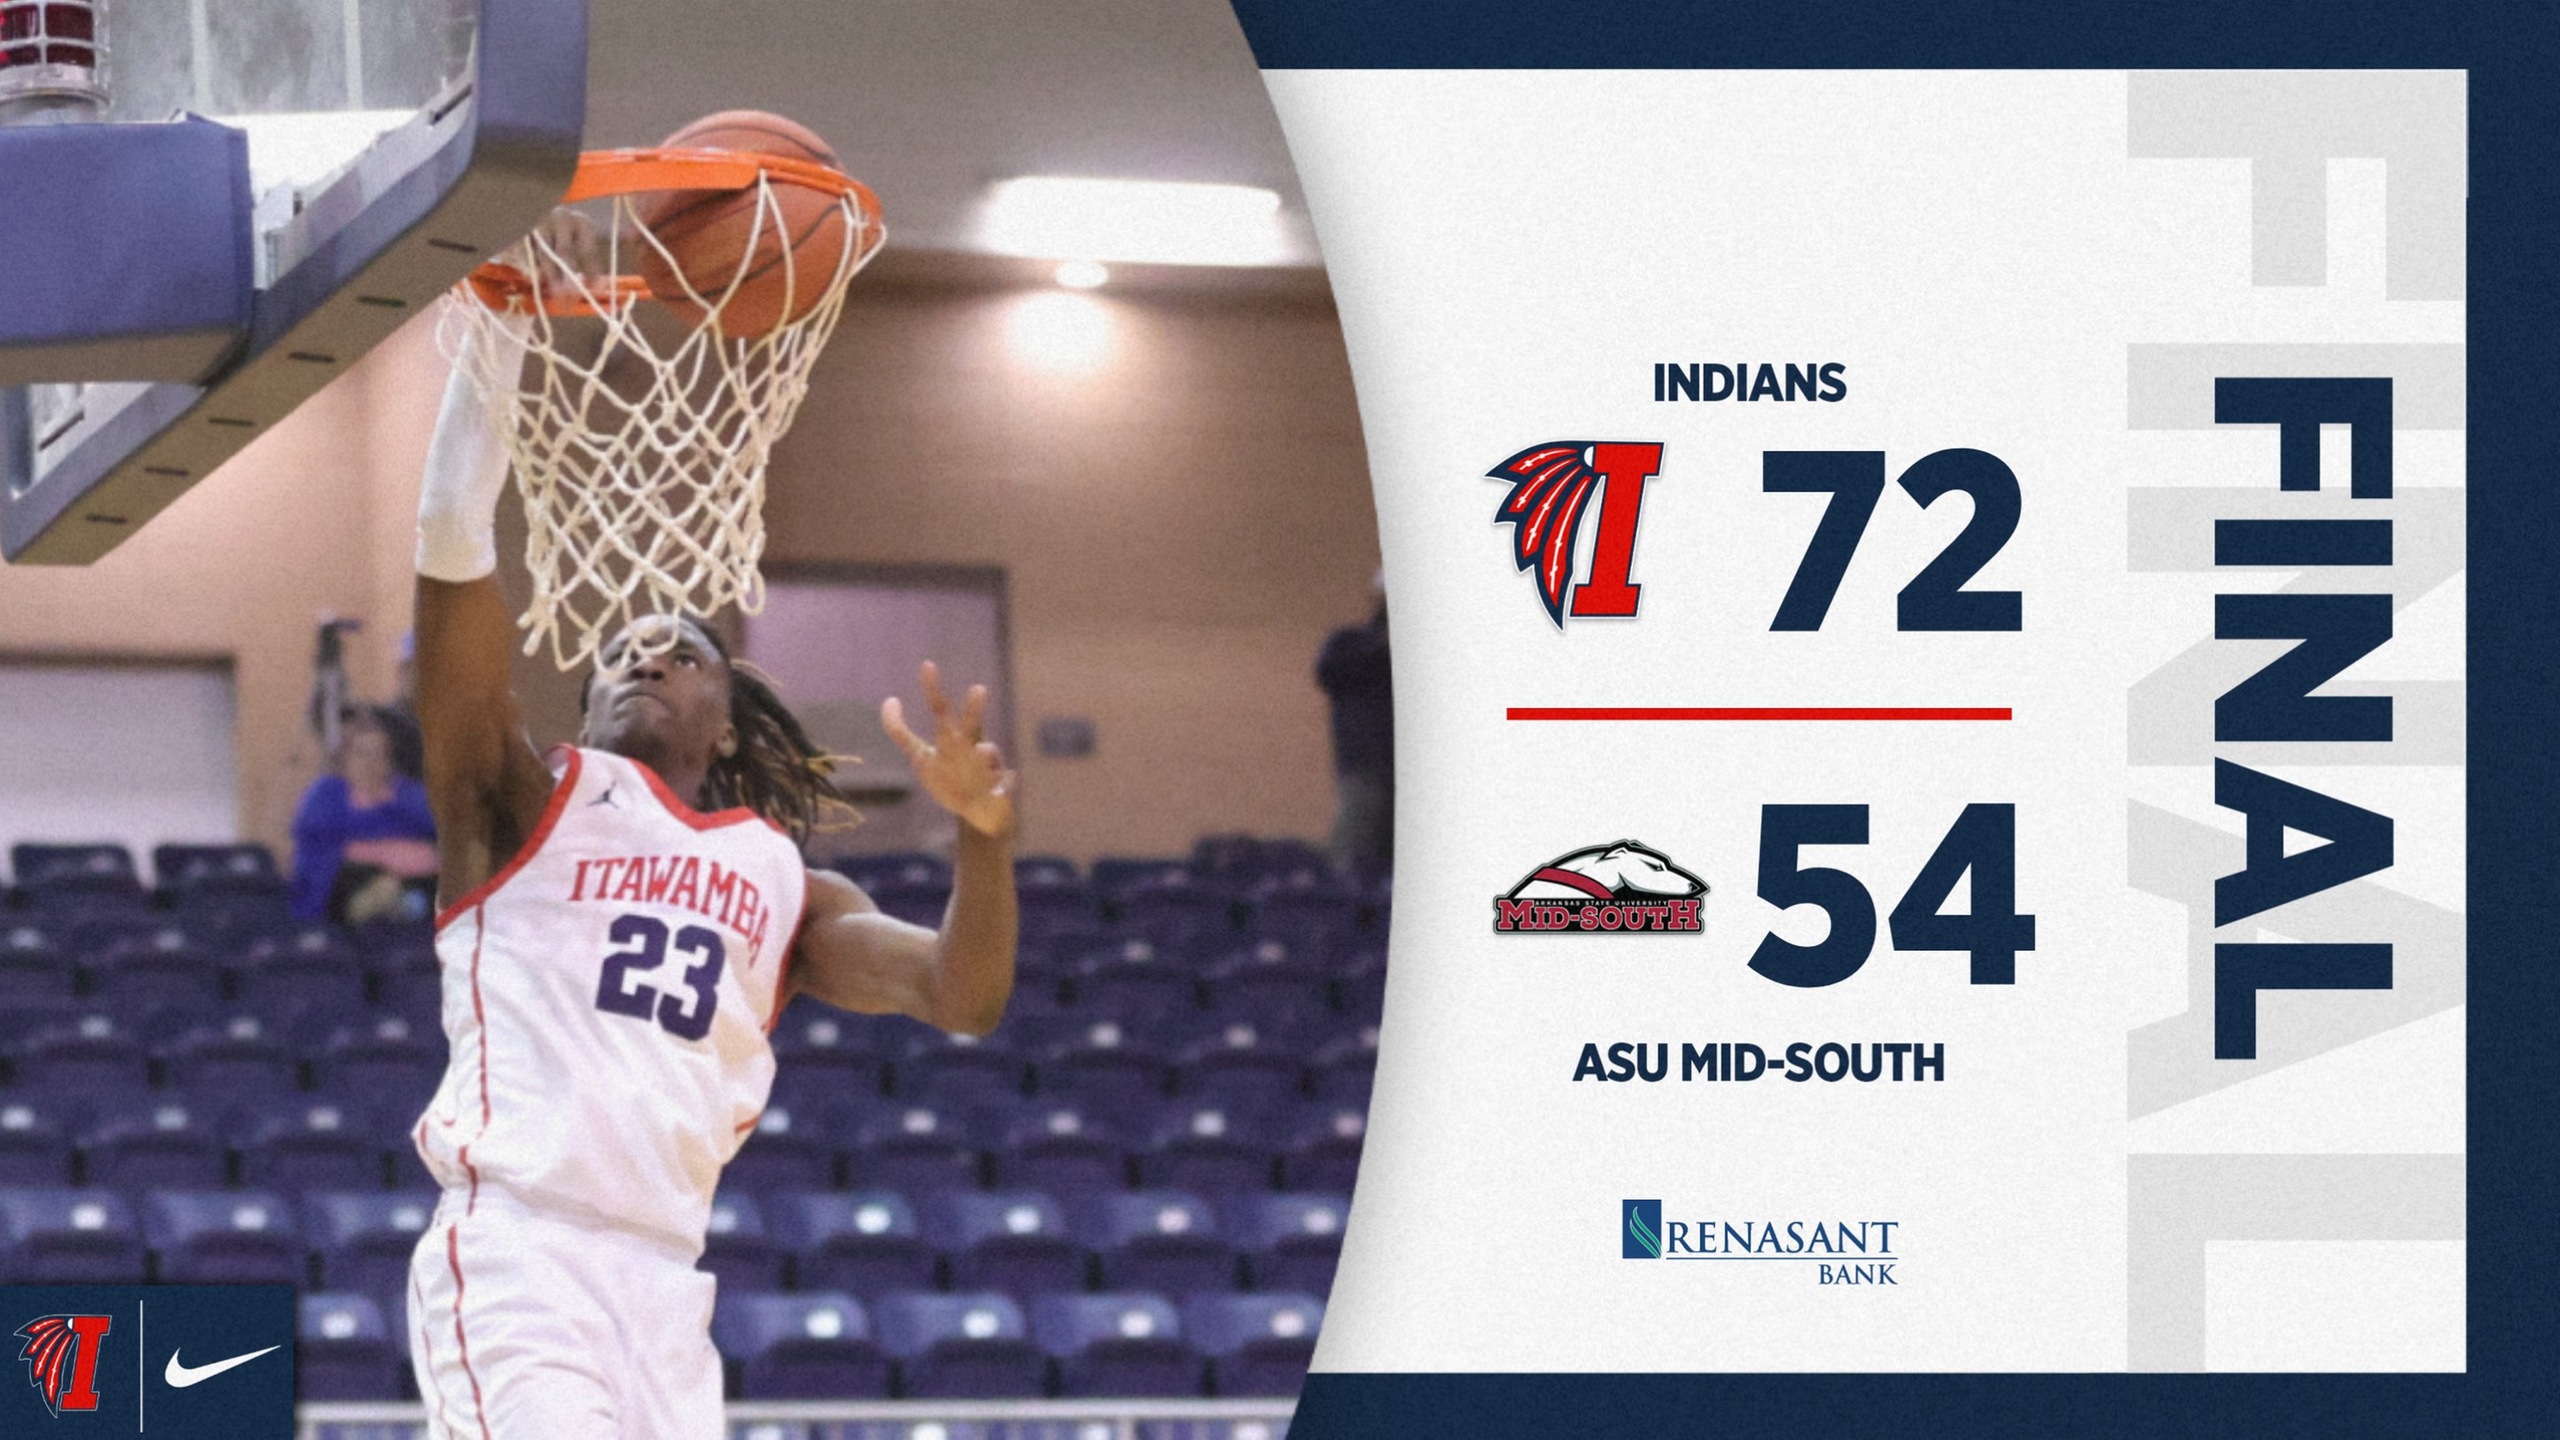 Indians take care of ASU-Mid South